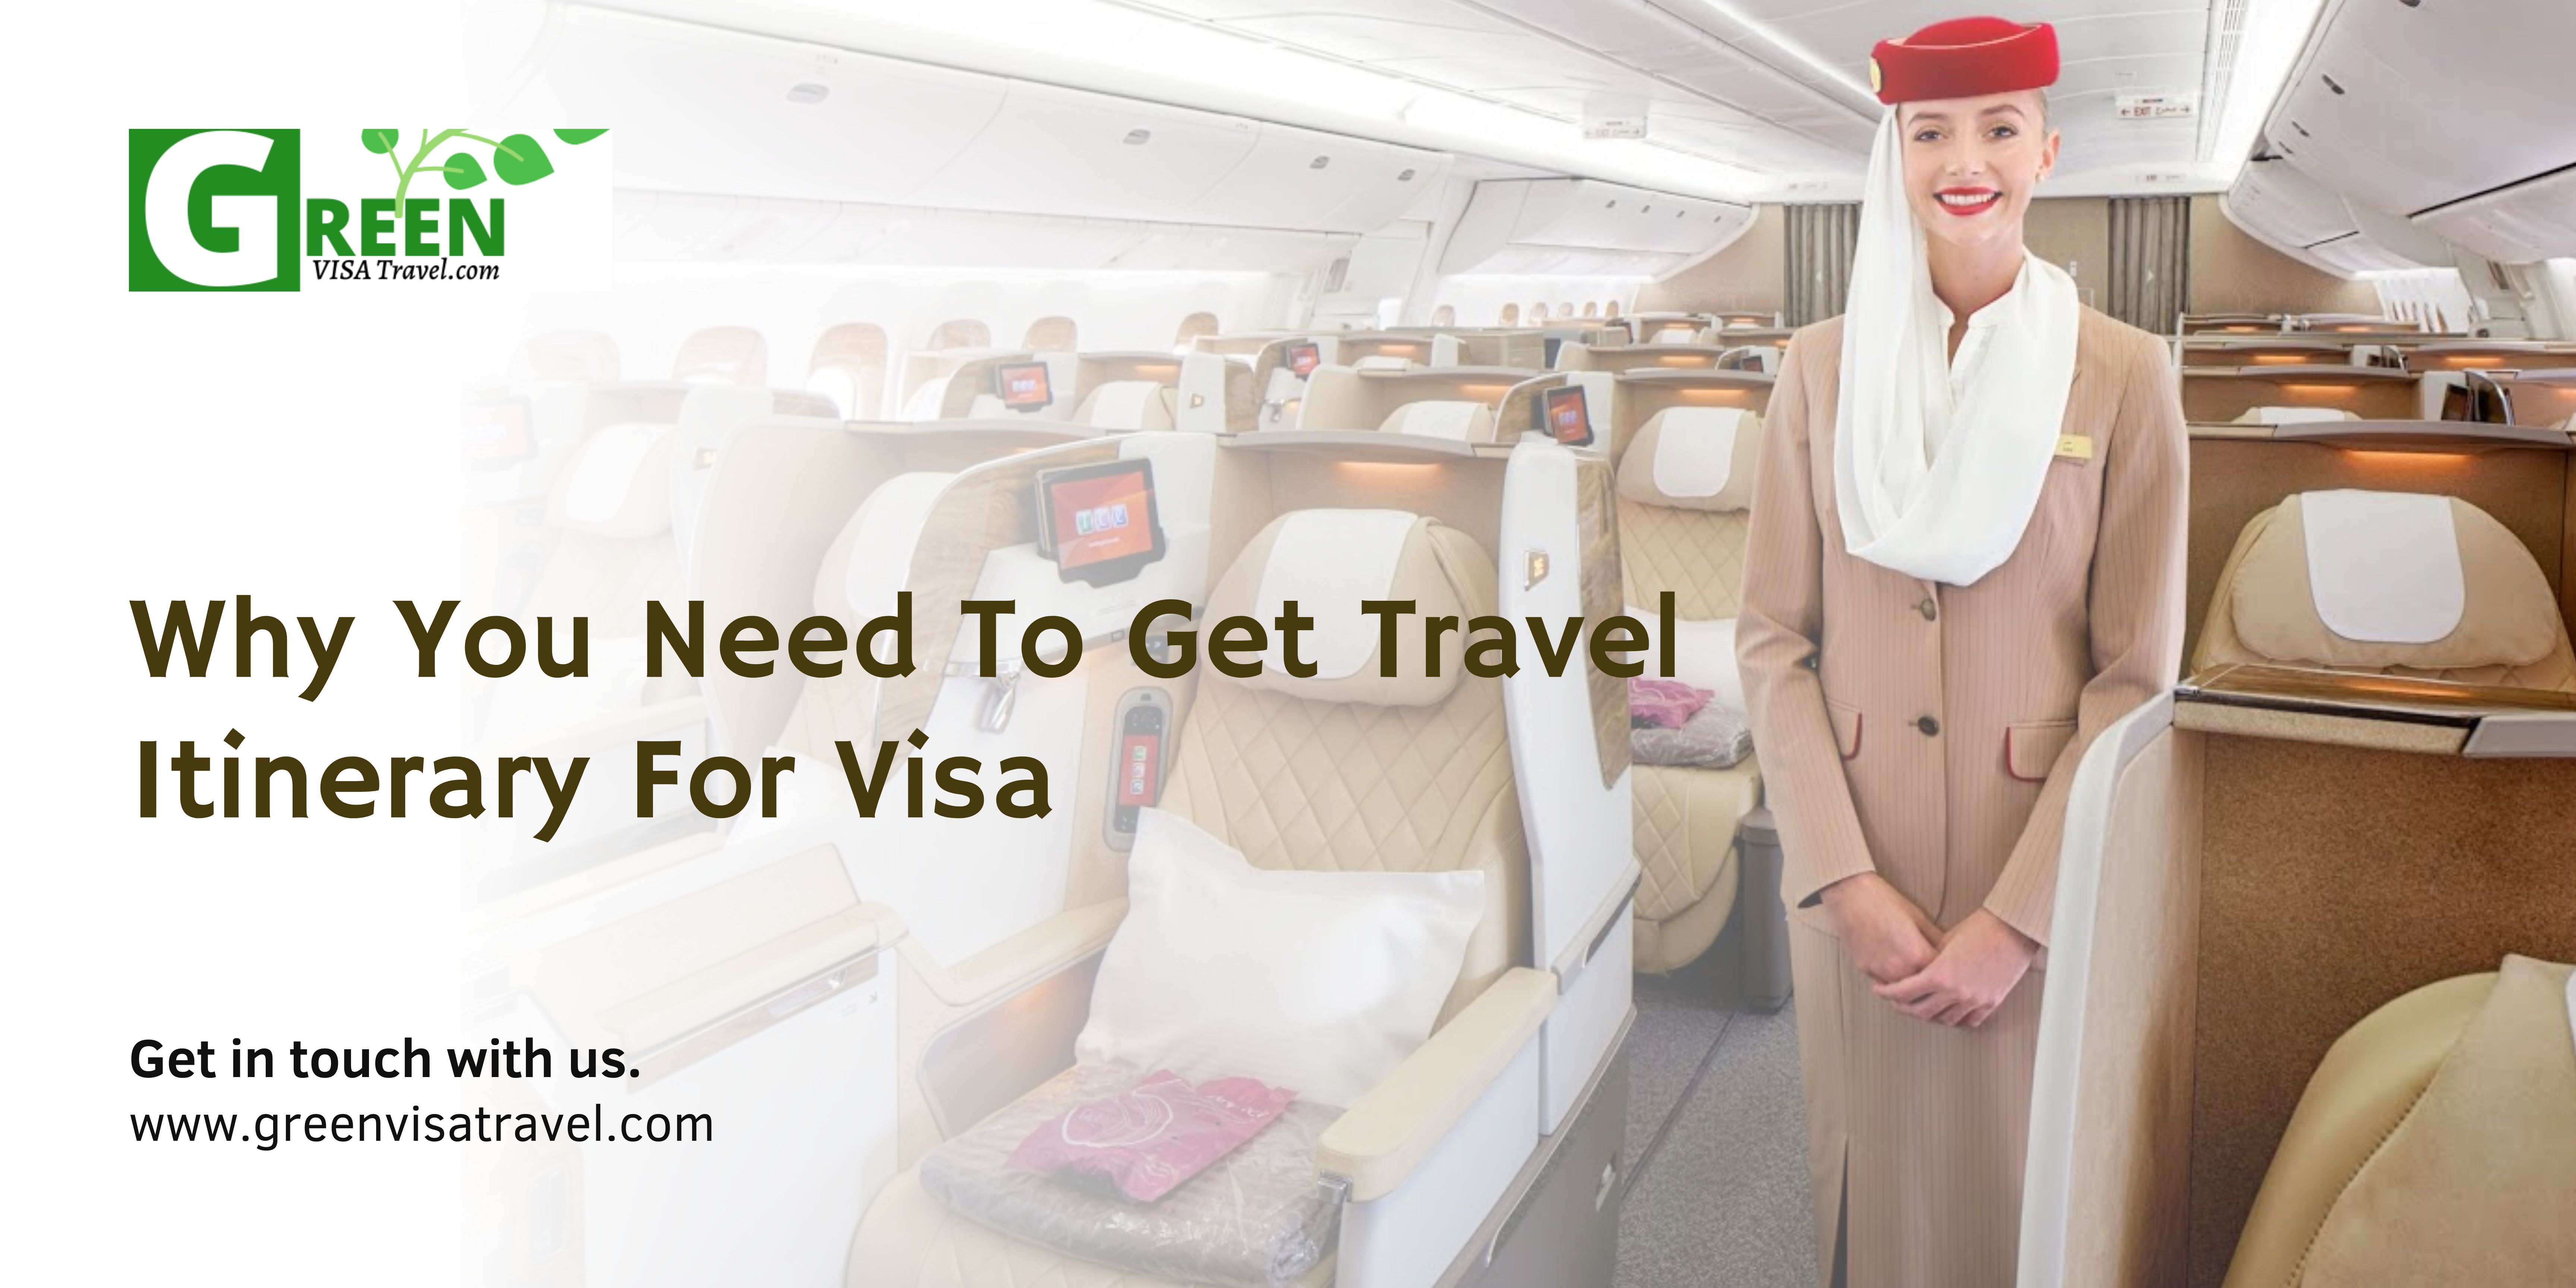 Why You Need To Get Travel Itinerary For Visa